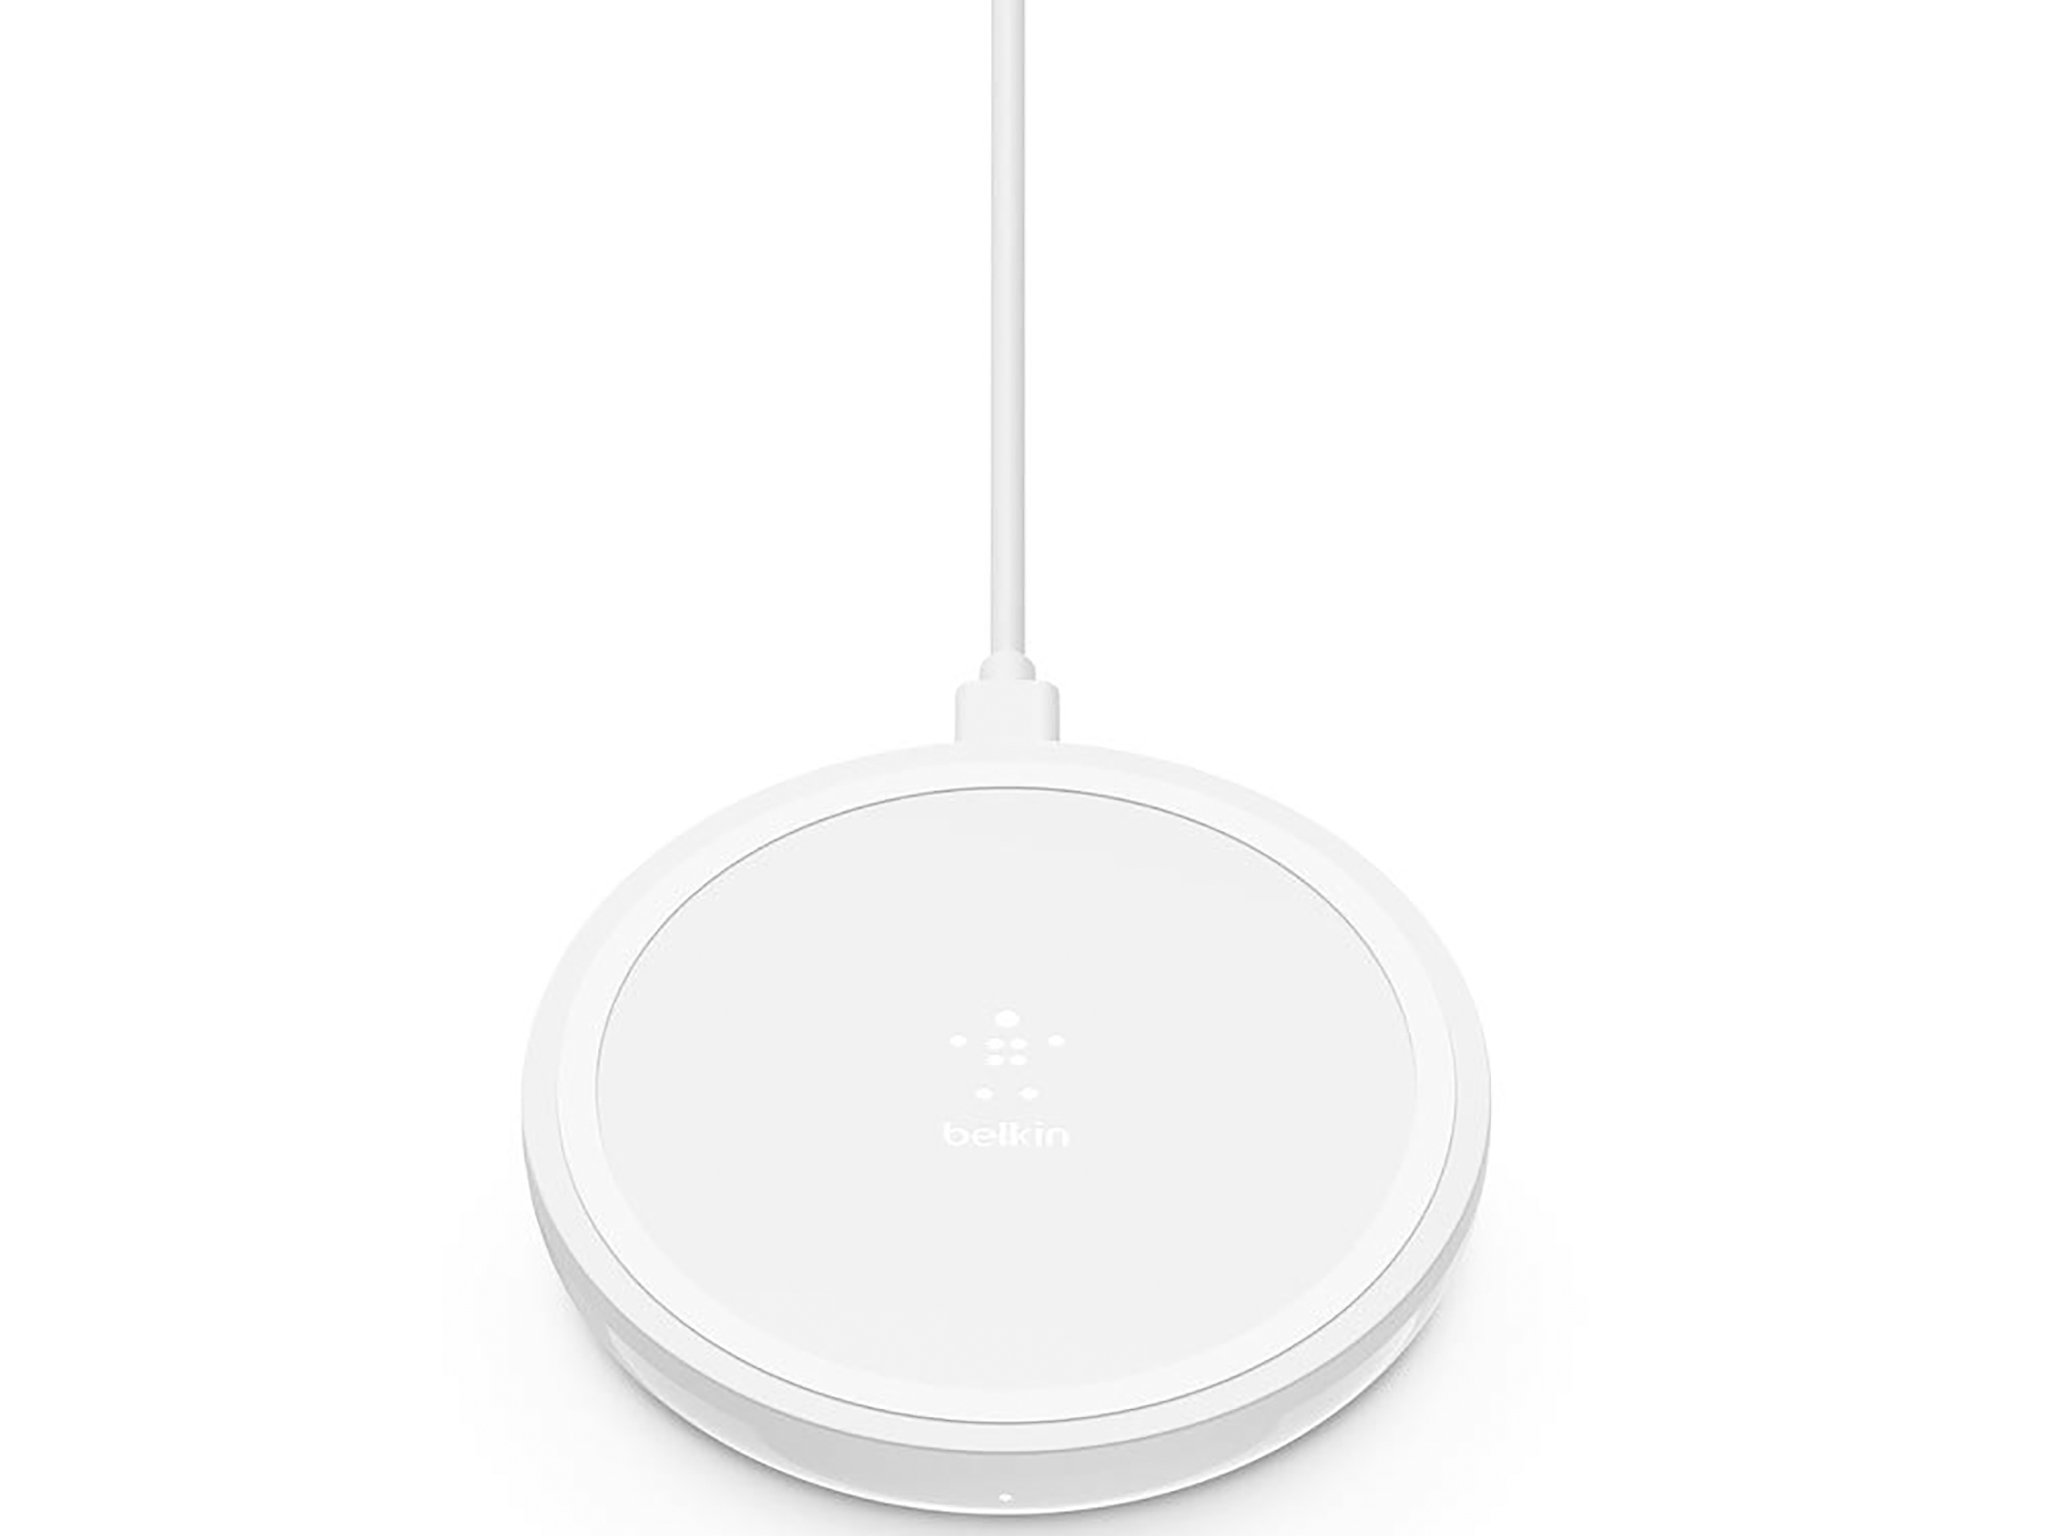 https://www.androidcentral.com/sites/androidcentral.com/files/article_images/2020/01/belkin-boostup-wireless-charger-10w.jpg?itok=kCK5br7I